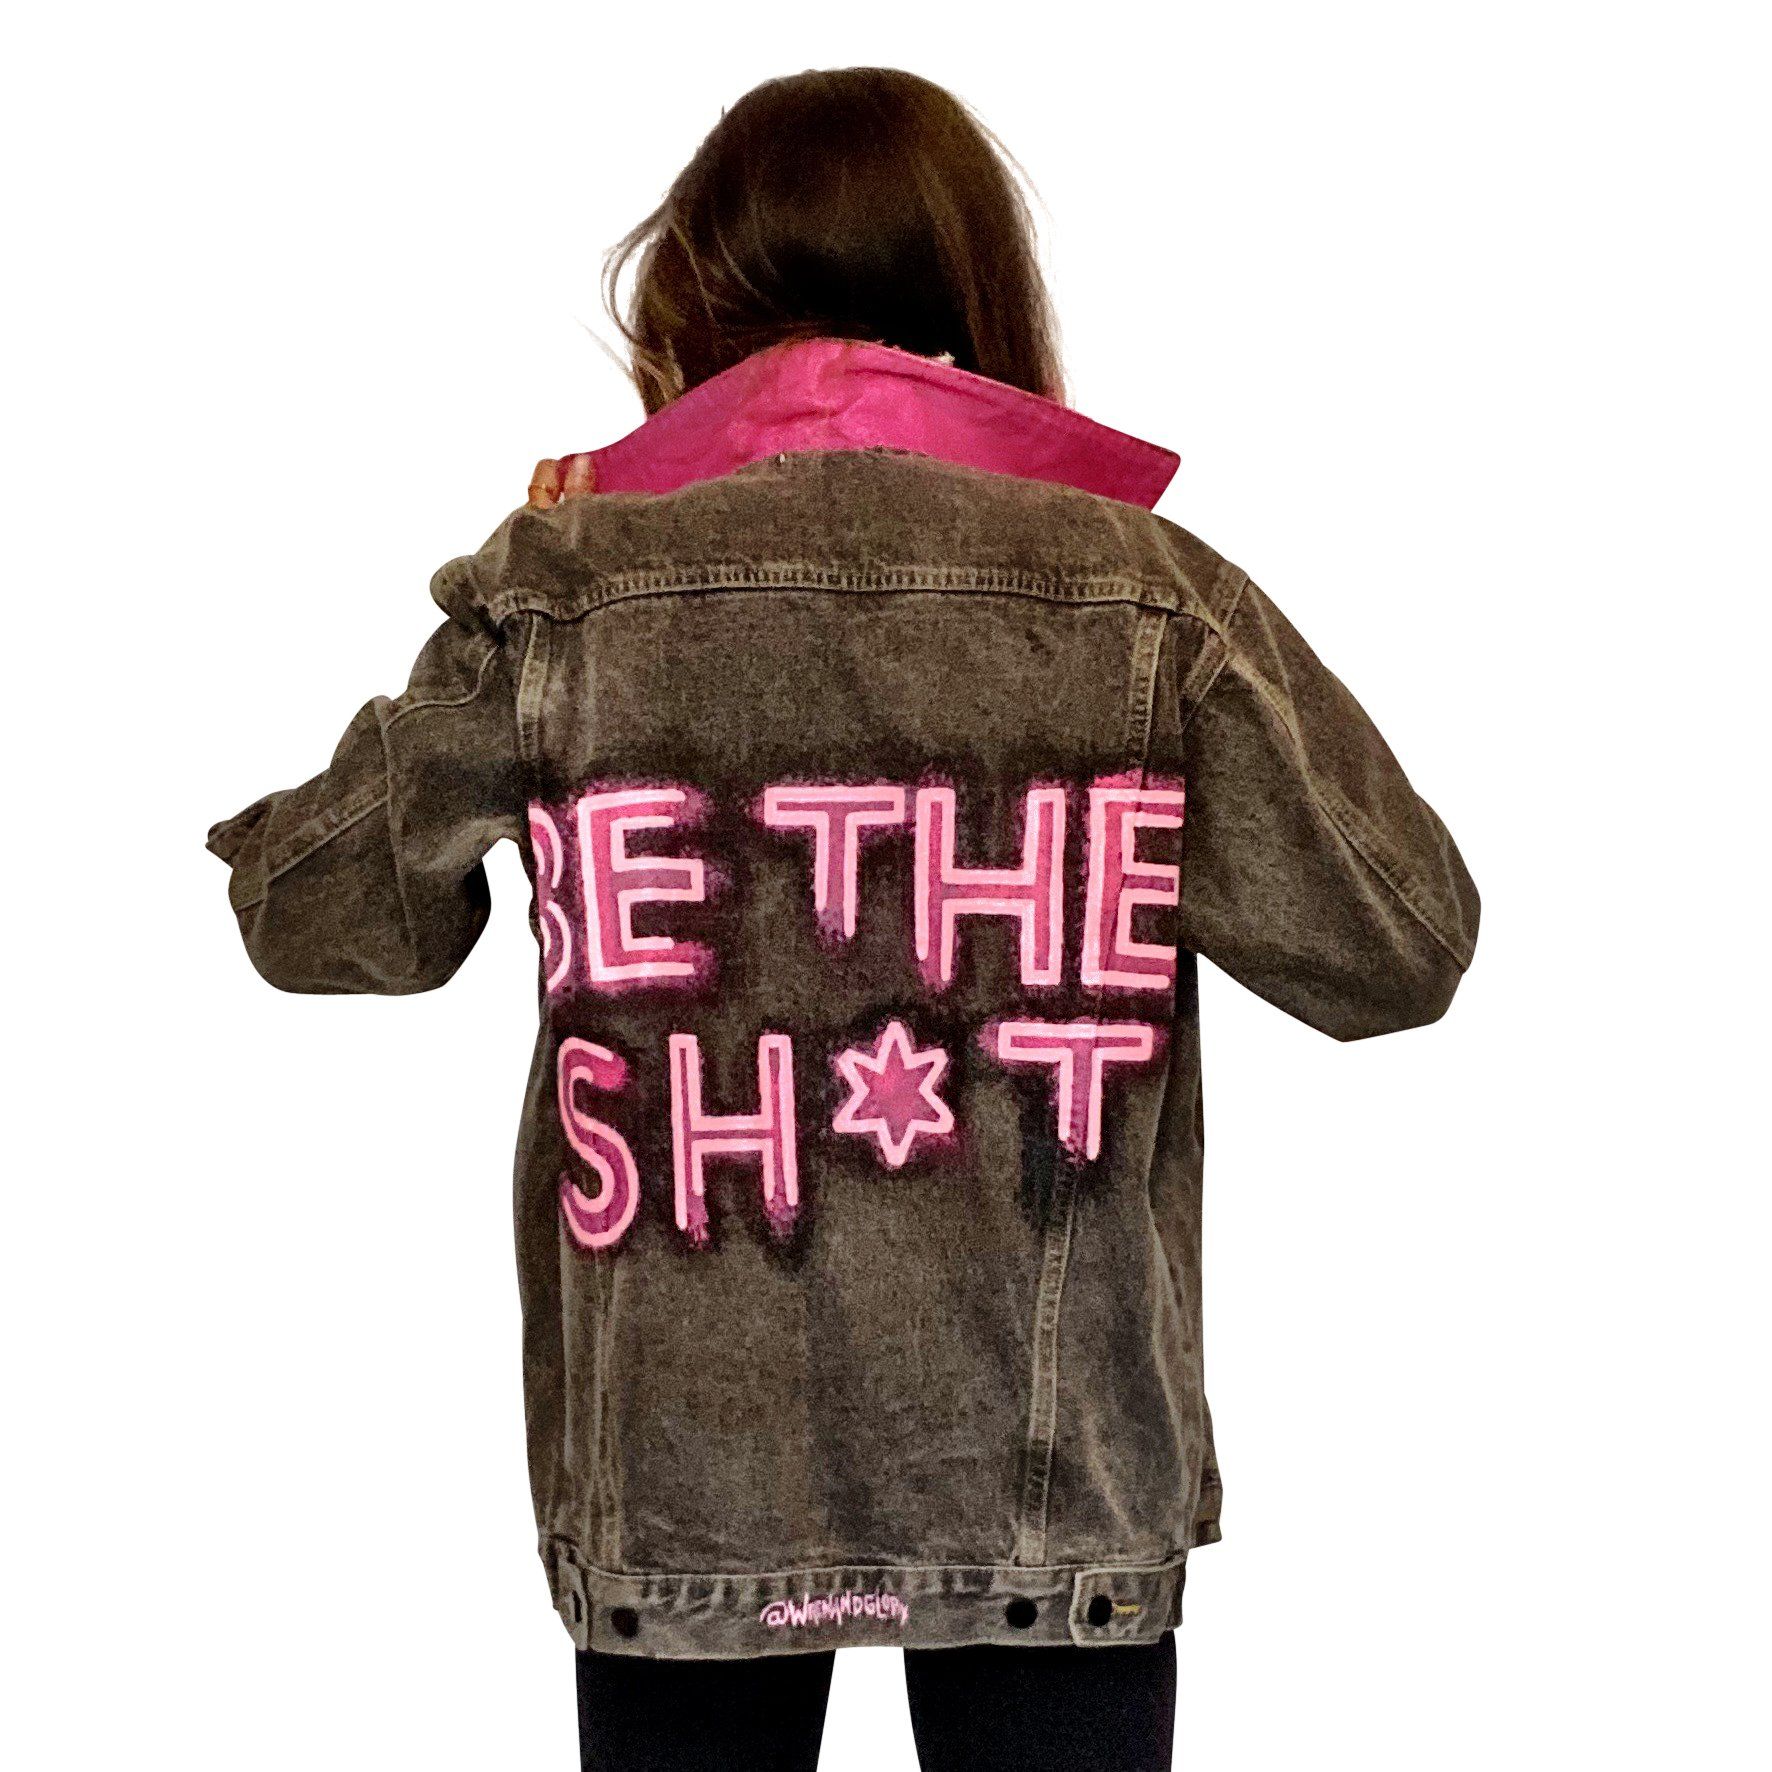 Faded black denim. BE THE SH*T logo painted on back in neon effect in bright pink. Collar and front pockets painted white. Signed @wrenandglory.